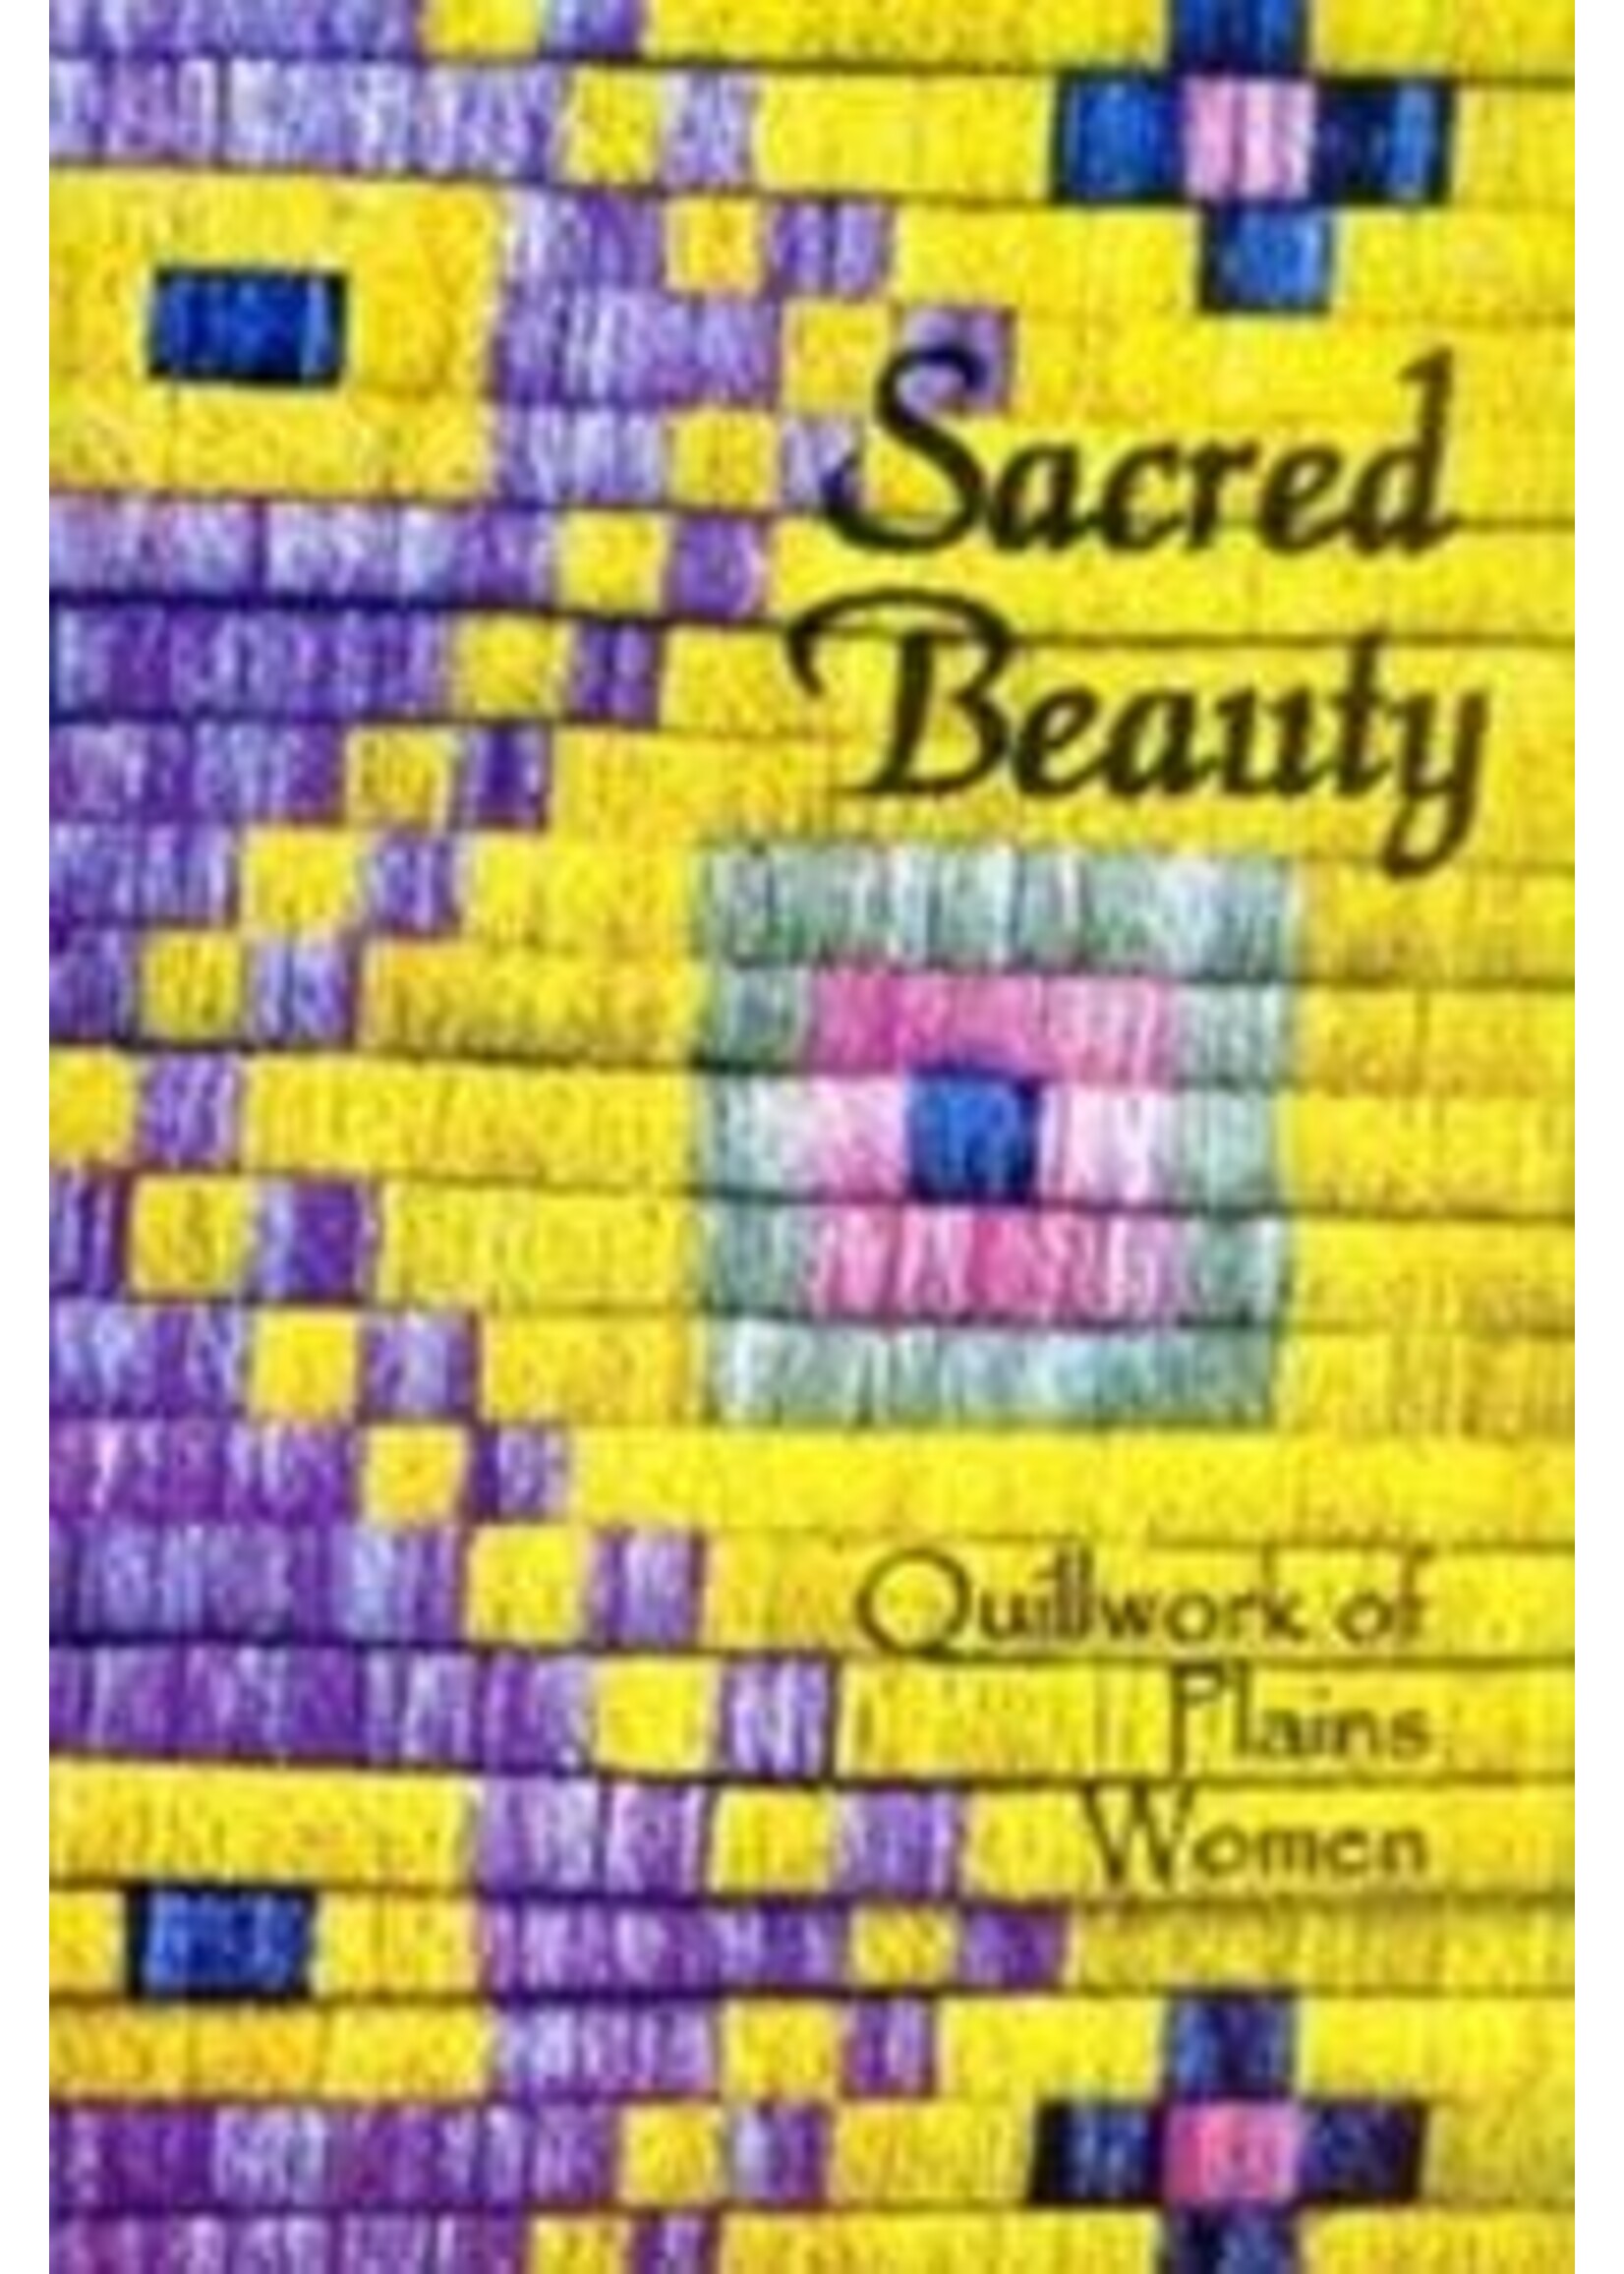 Sacred Beauty: Quillwork of Plains Women